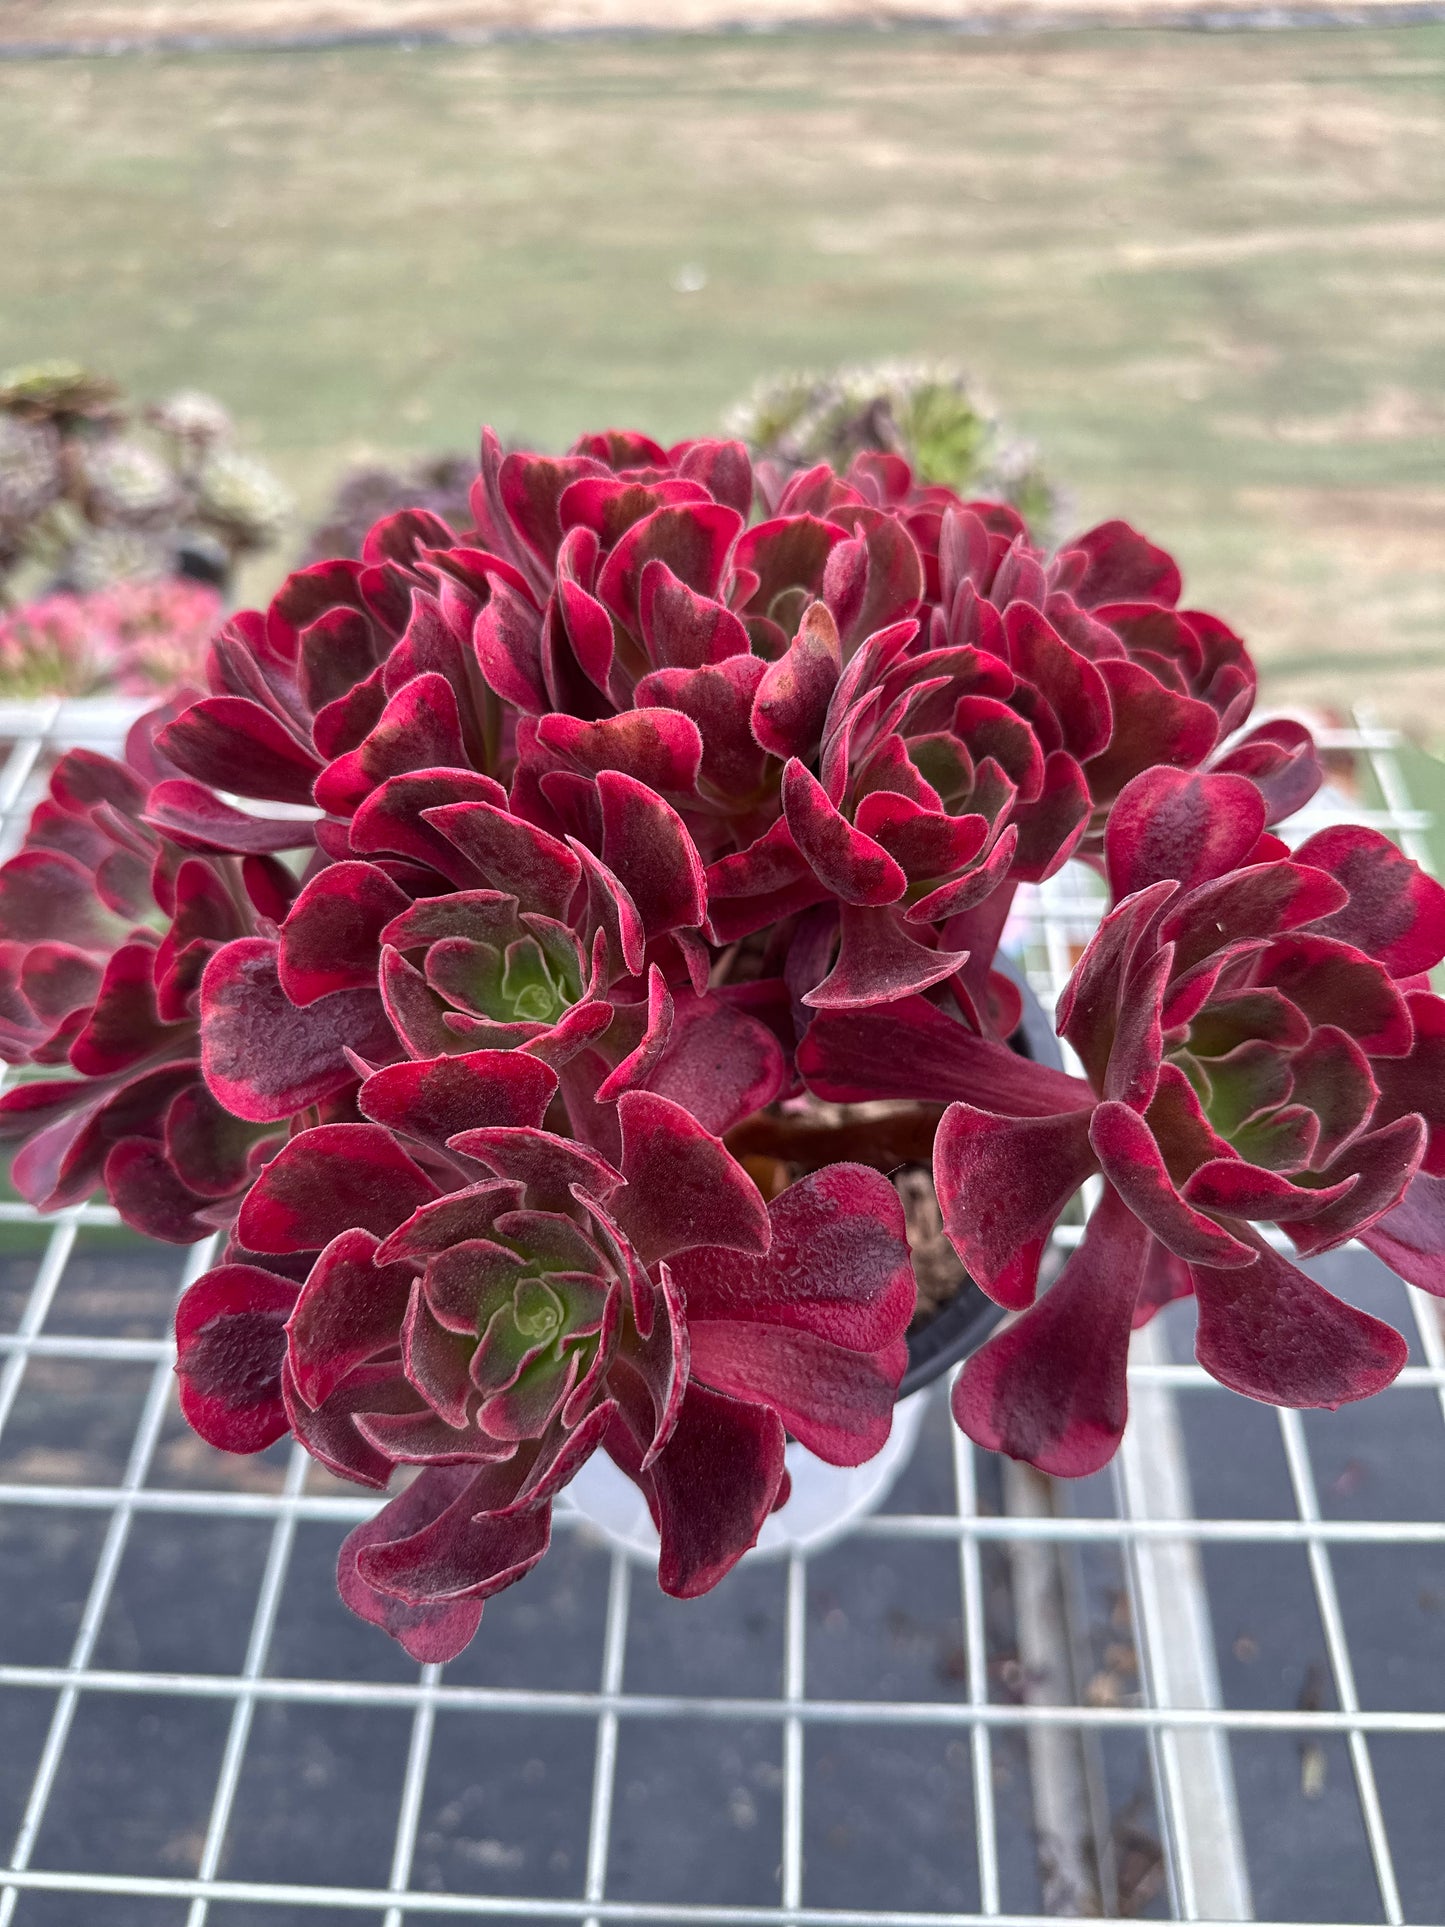 Cupid cluster20-30cm Old pile/ 8-15 heads/ Aeonium cluster / Variegated Natural Live Plants Succulents2023